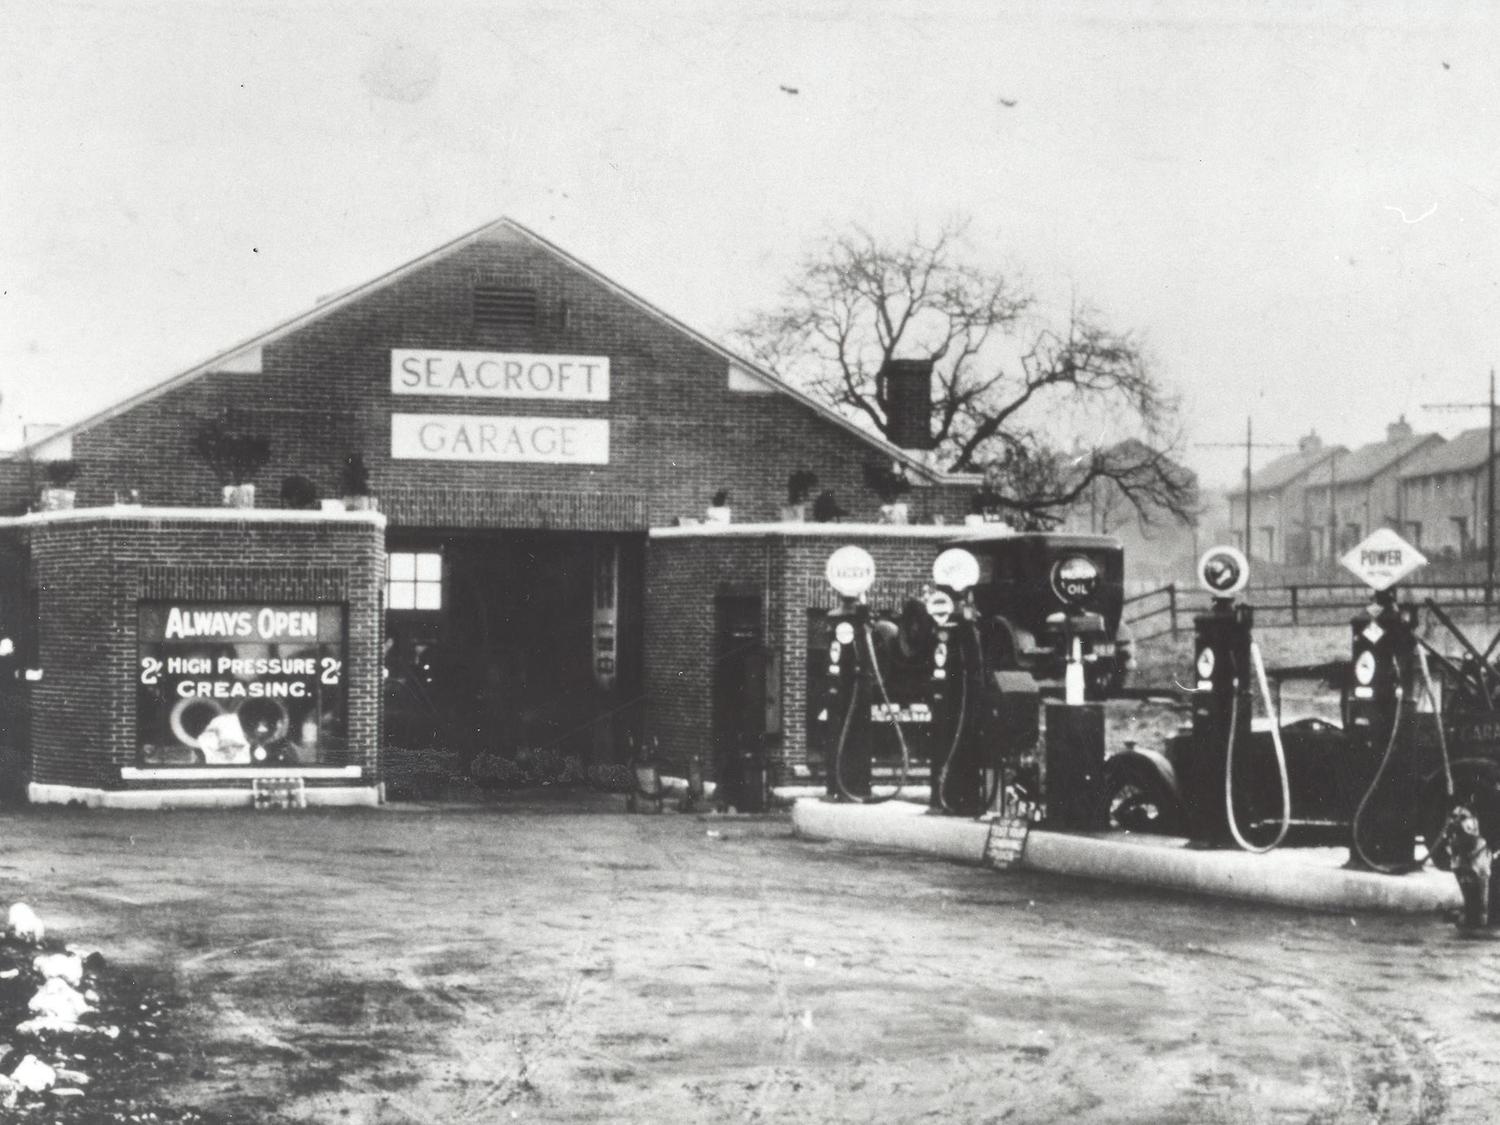 Seacroft Garage. Owned by the Eastwood brothers and then Bryden's and was a popular calling spot for motorists and motorcyles.